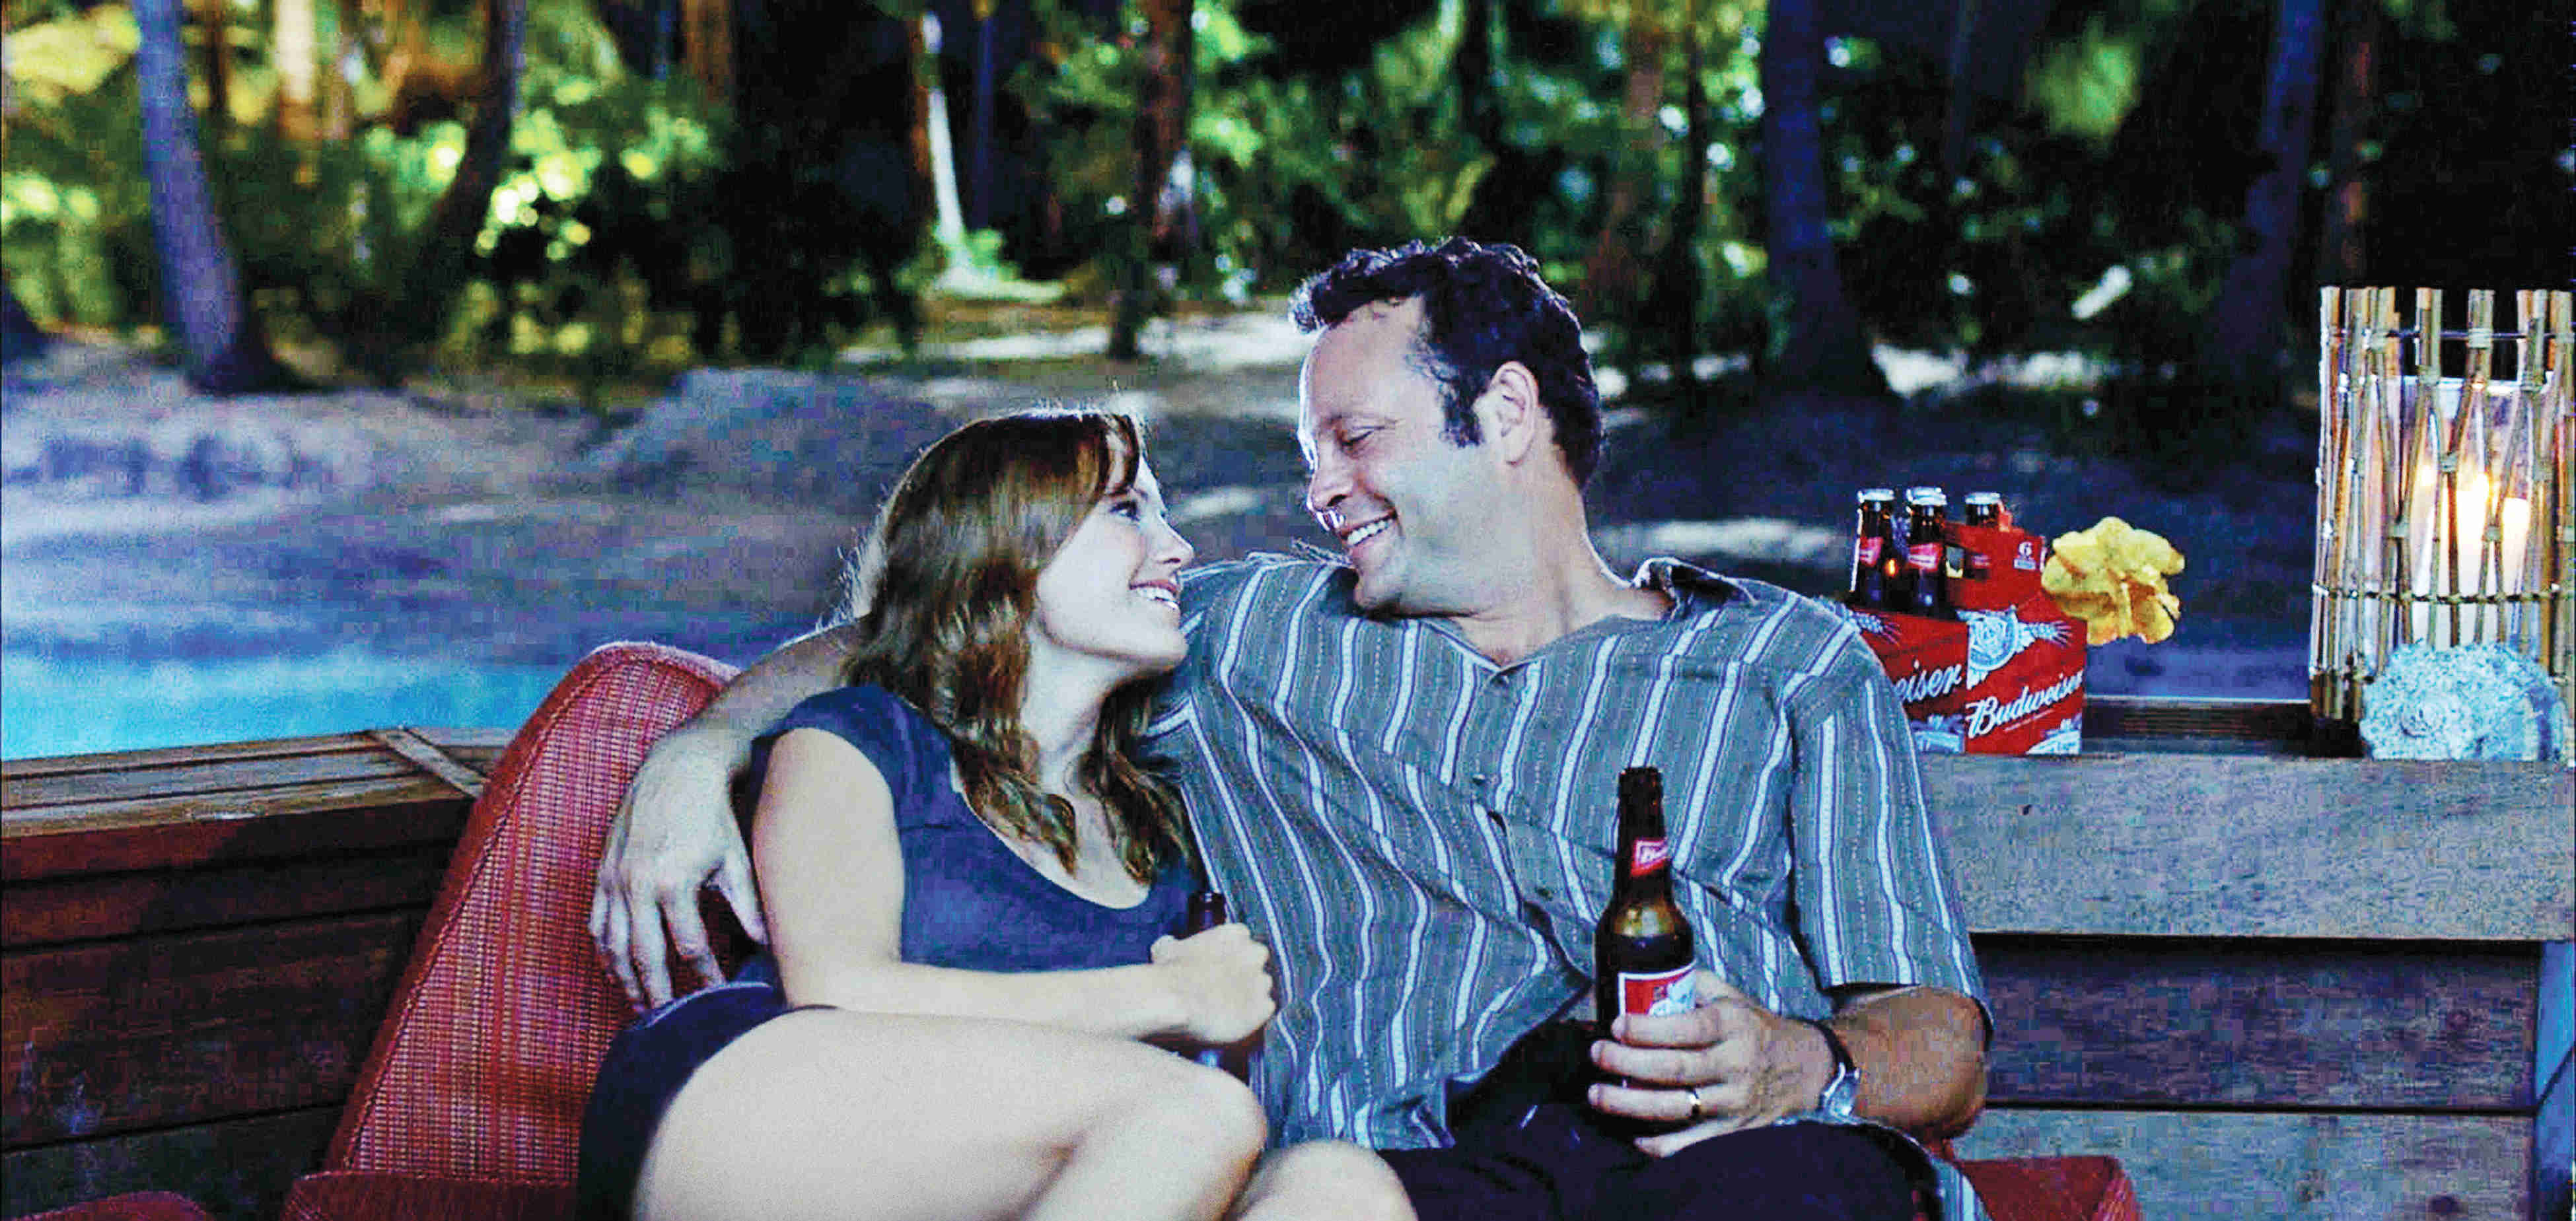 Malin Akerman and Vince Vaughn in Universal Pictures' Couples Retreat (2009)